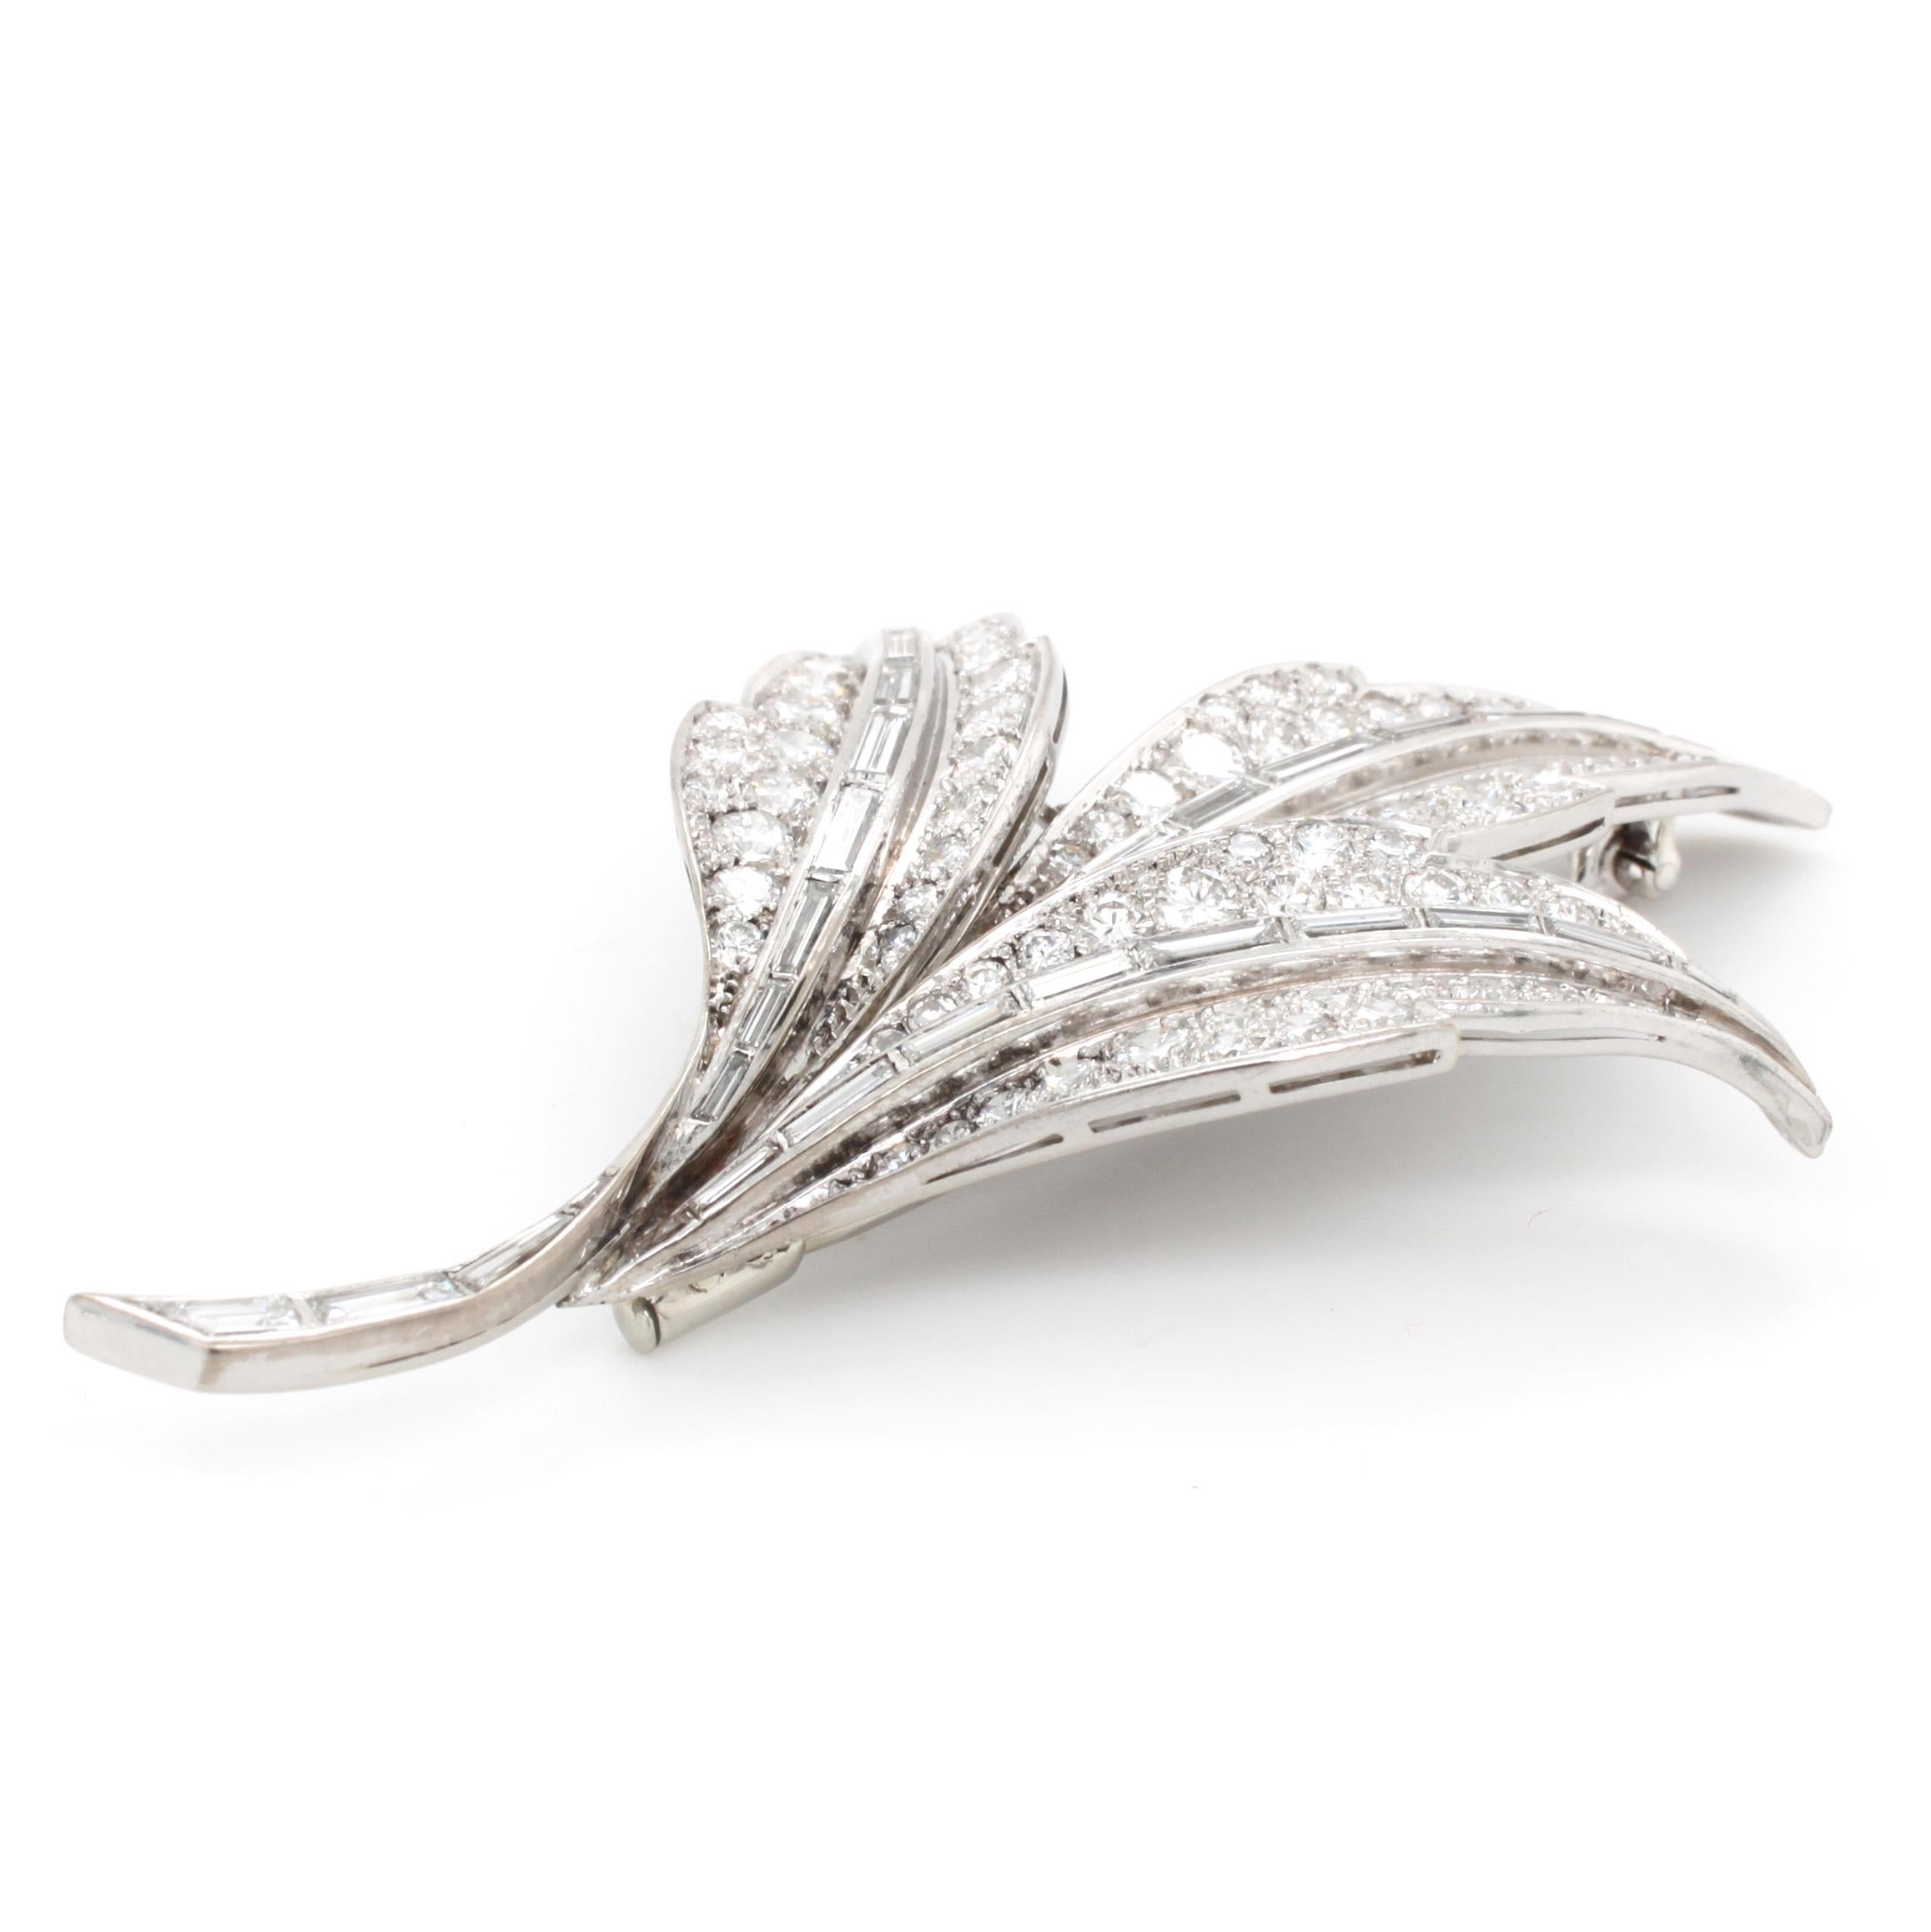 A stunning three leaves diamond brooch made in the classic Art Deco style. 
The brooch is set with 89 round and brilliant cut diamonds of approx. 2.4ct and 31 baguette and trapeze cut diamonds of approx. 3ct (H-I/VVS-VS). 
It is beautifully crafted